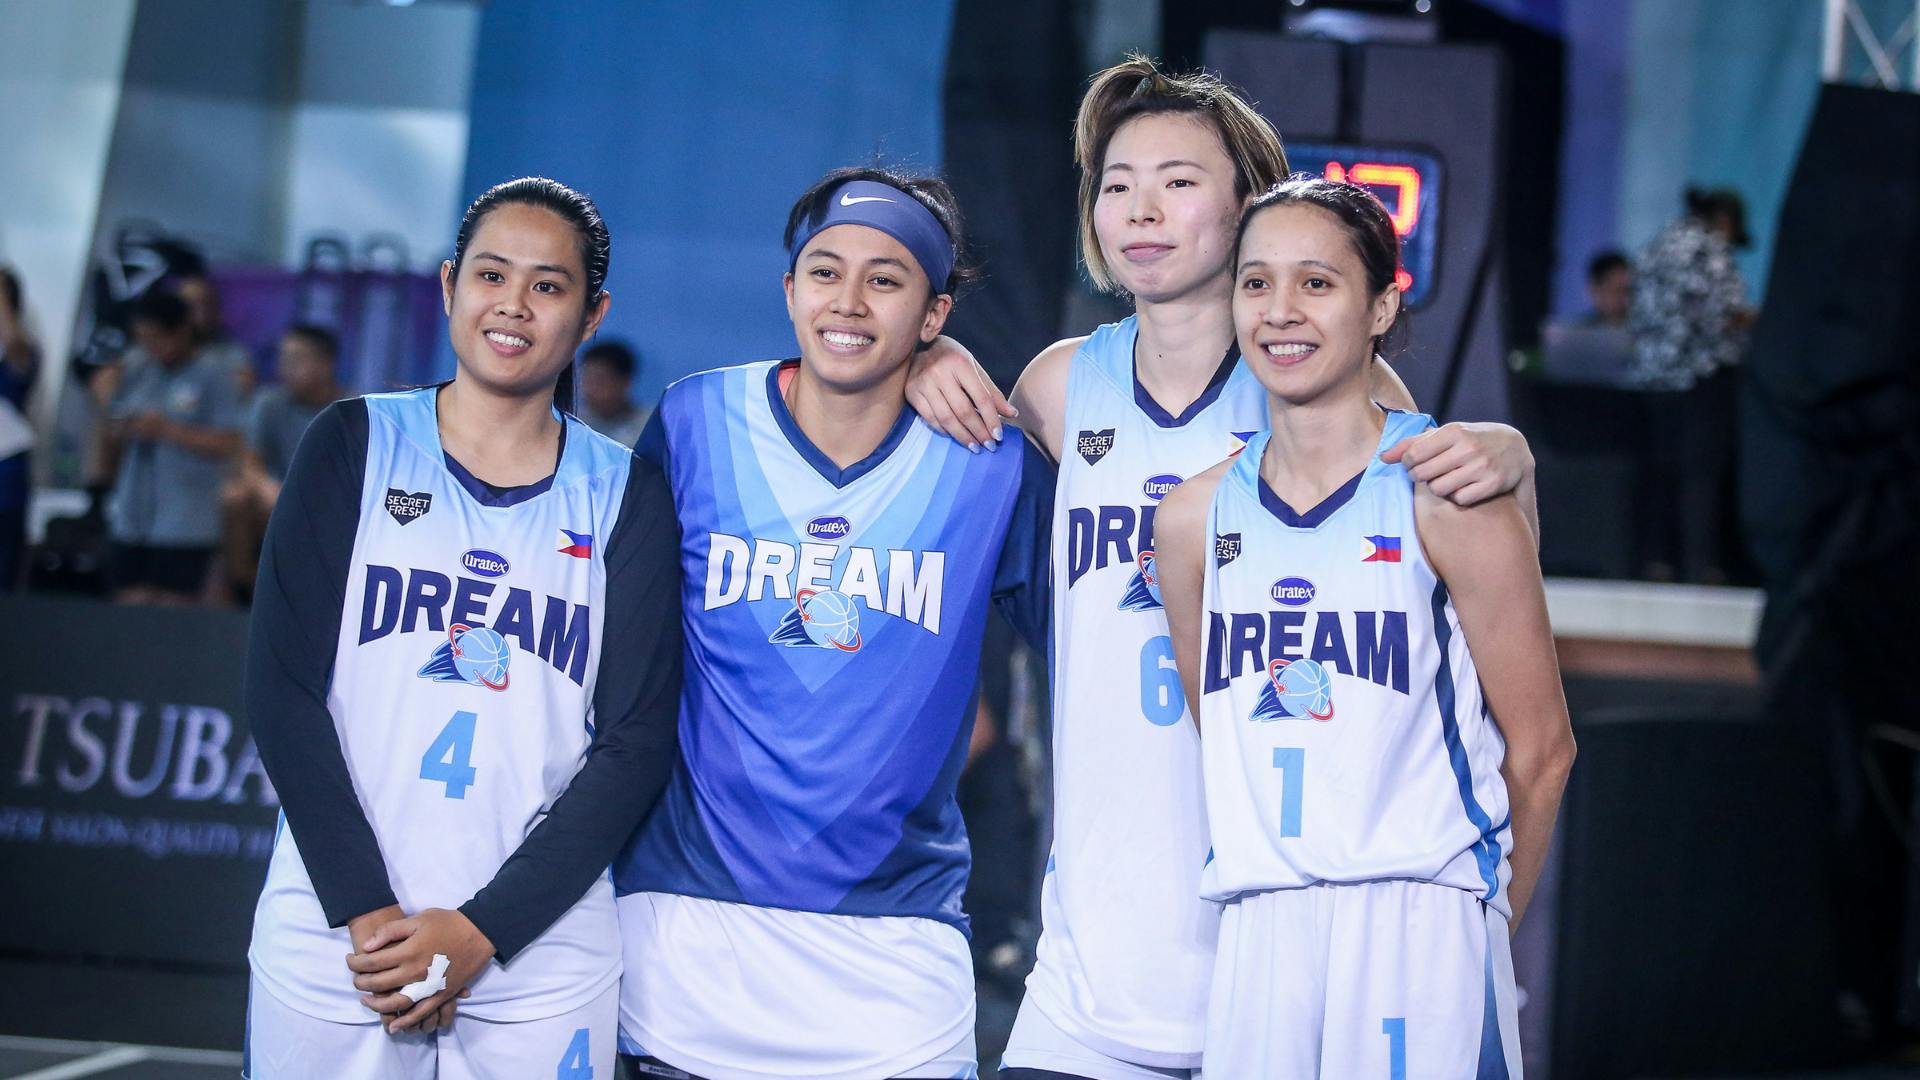 Gilas Women mainstay Kaye Pingol to suit up for Uratex Dream in 3x3 Basketball Thailand International League